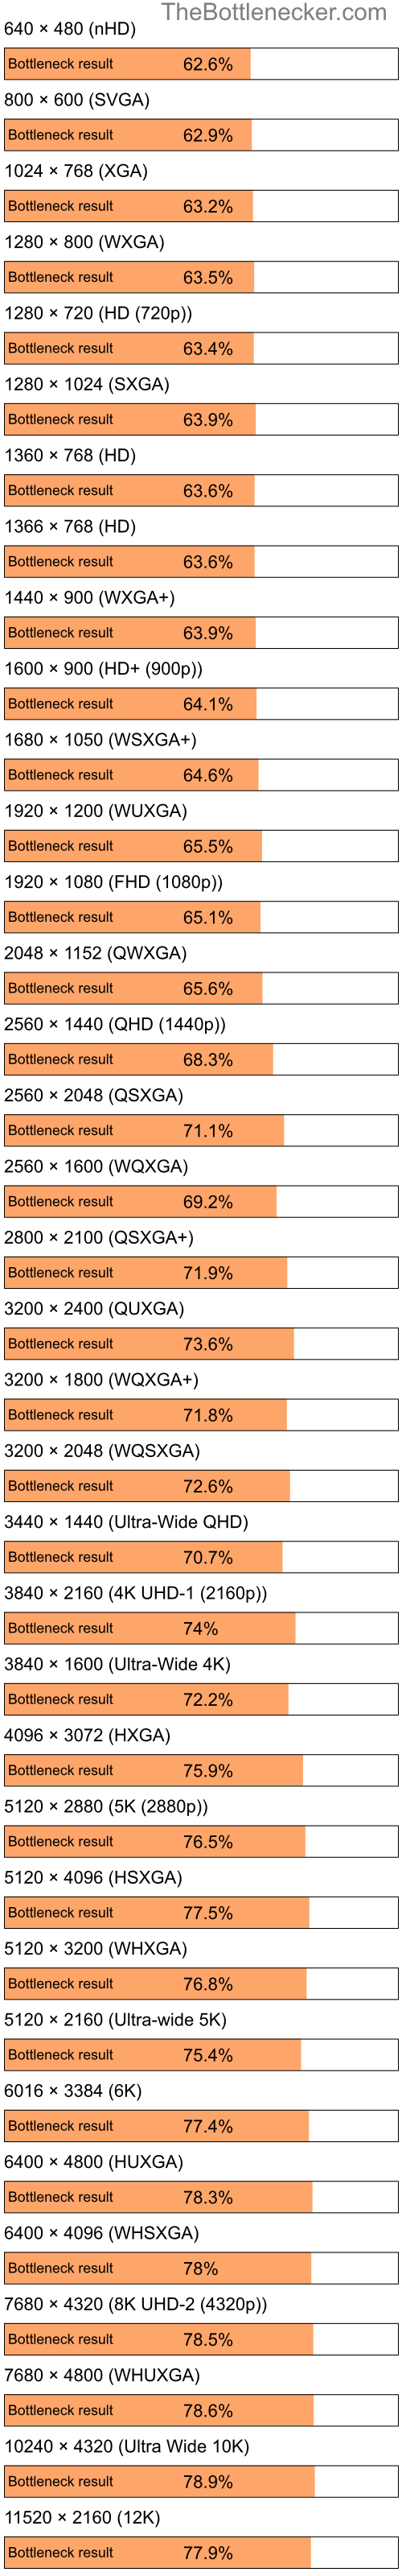 Bottleneck results by resolution for Intel Pentium 4 and AMD Mobility Radeon HD 4225 in Processor Intense Tasks